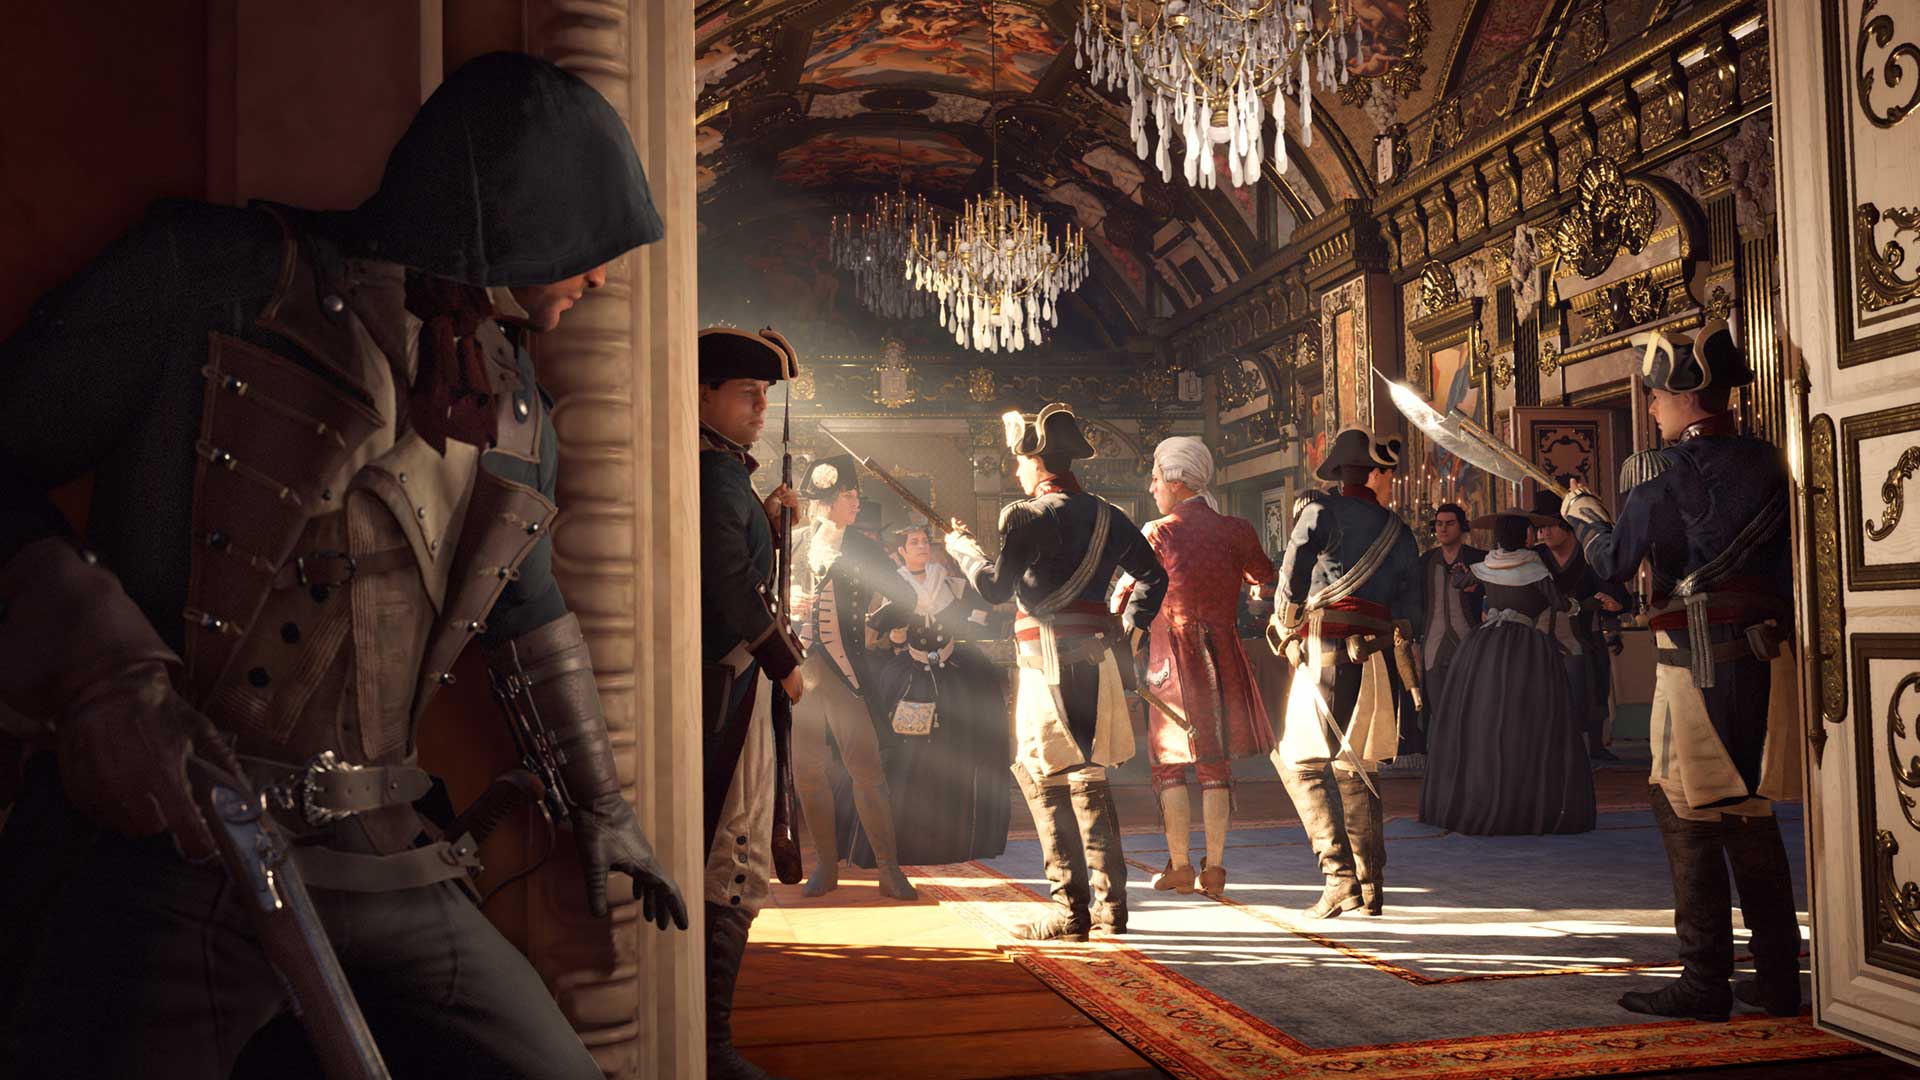 Last Chance To Get Assassin's Creed Unity For Free On PC - GameSpot